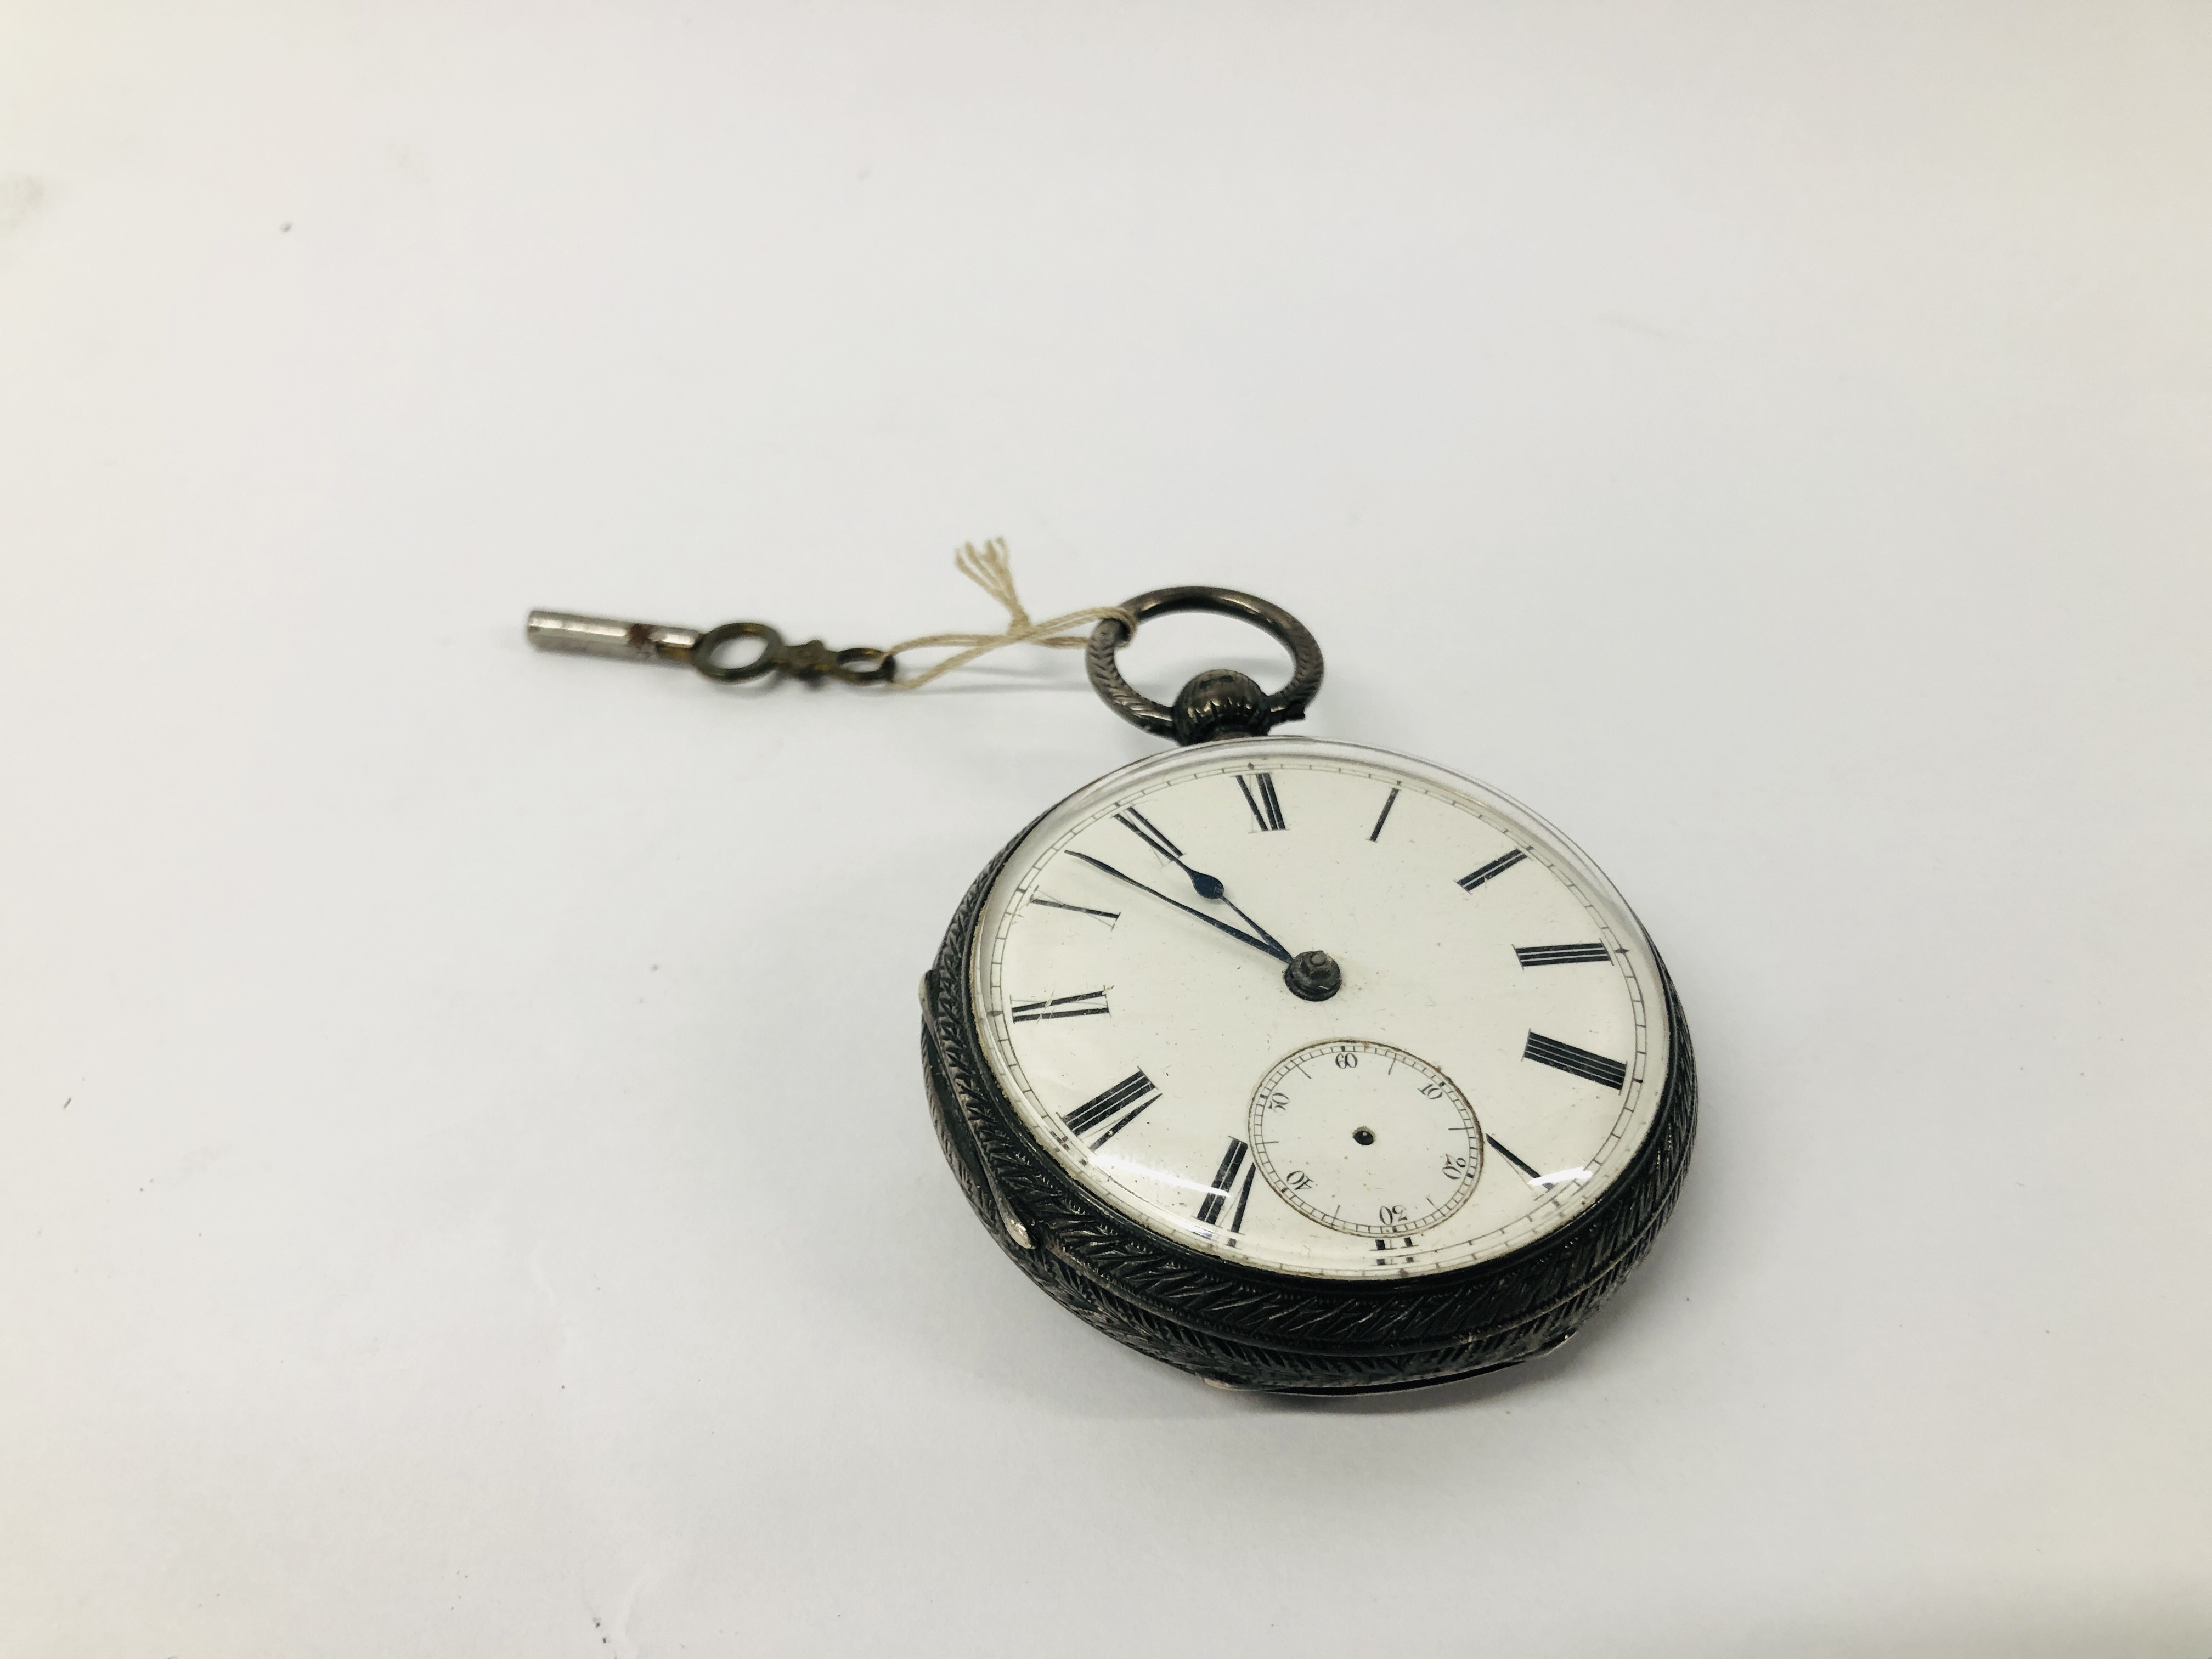 A SILVER CASED GENTLEMANS POCKET WATCH WITH KEY